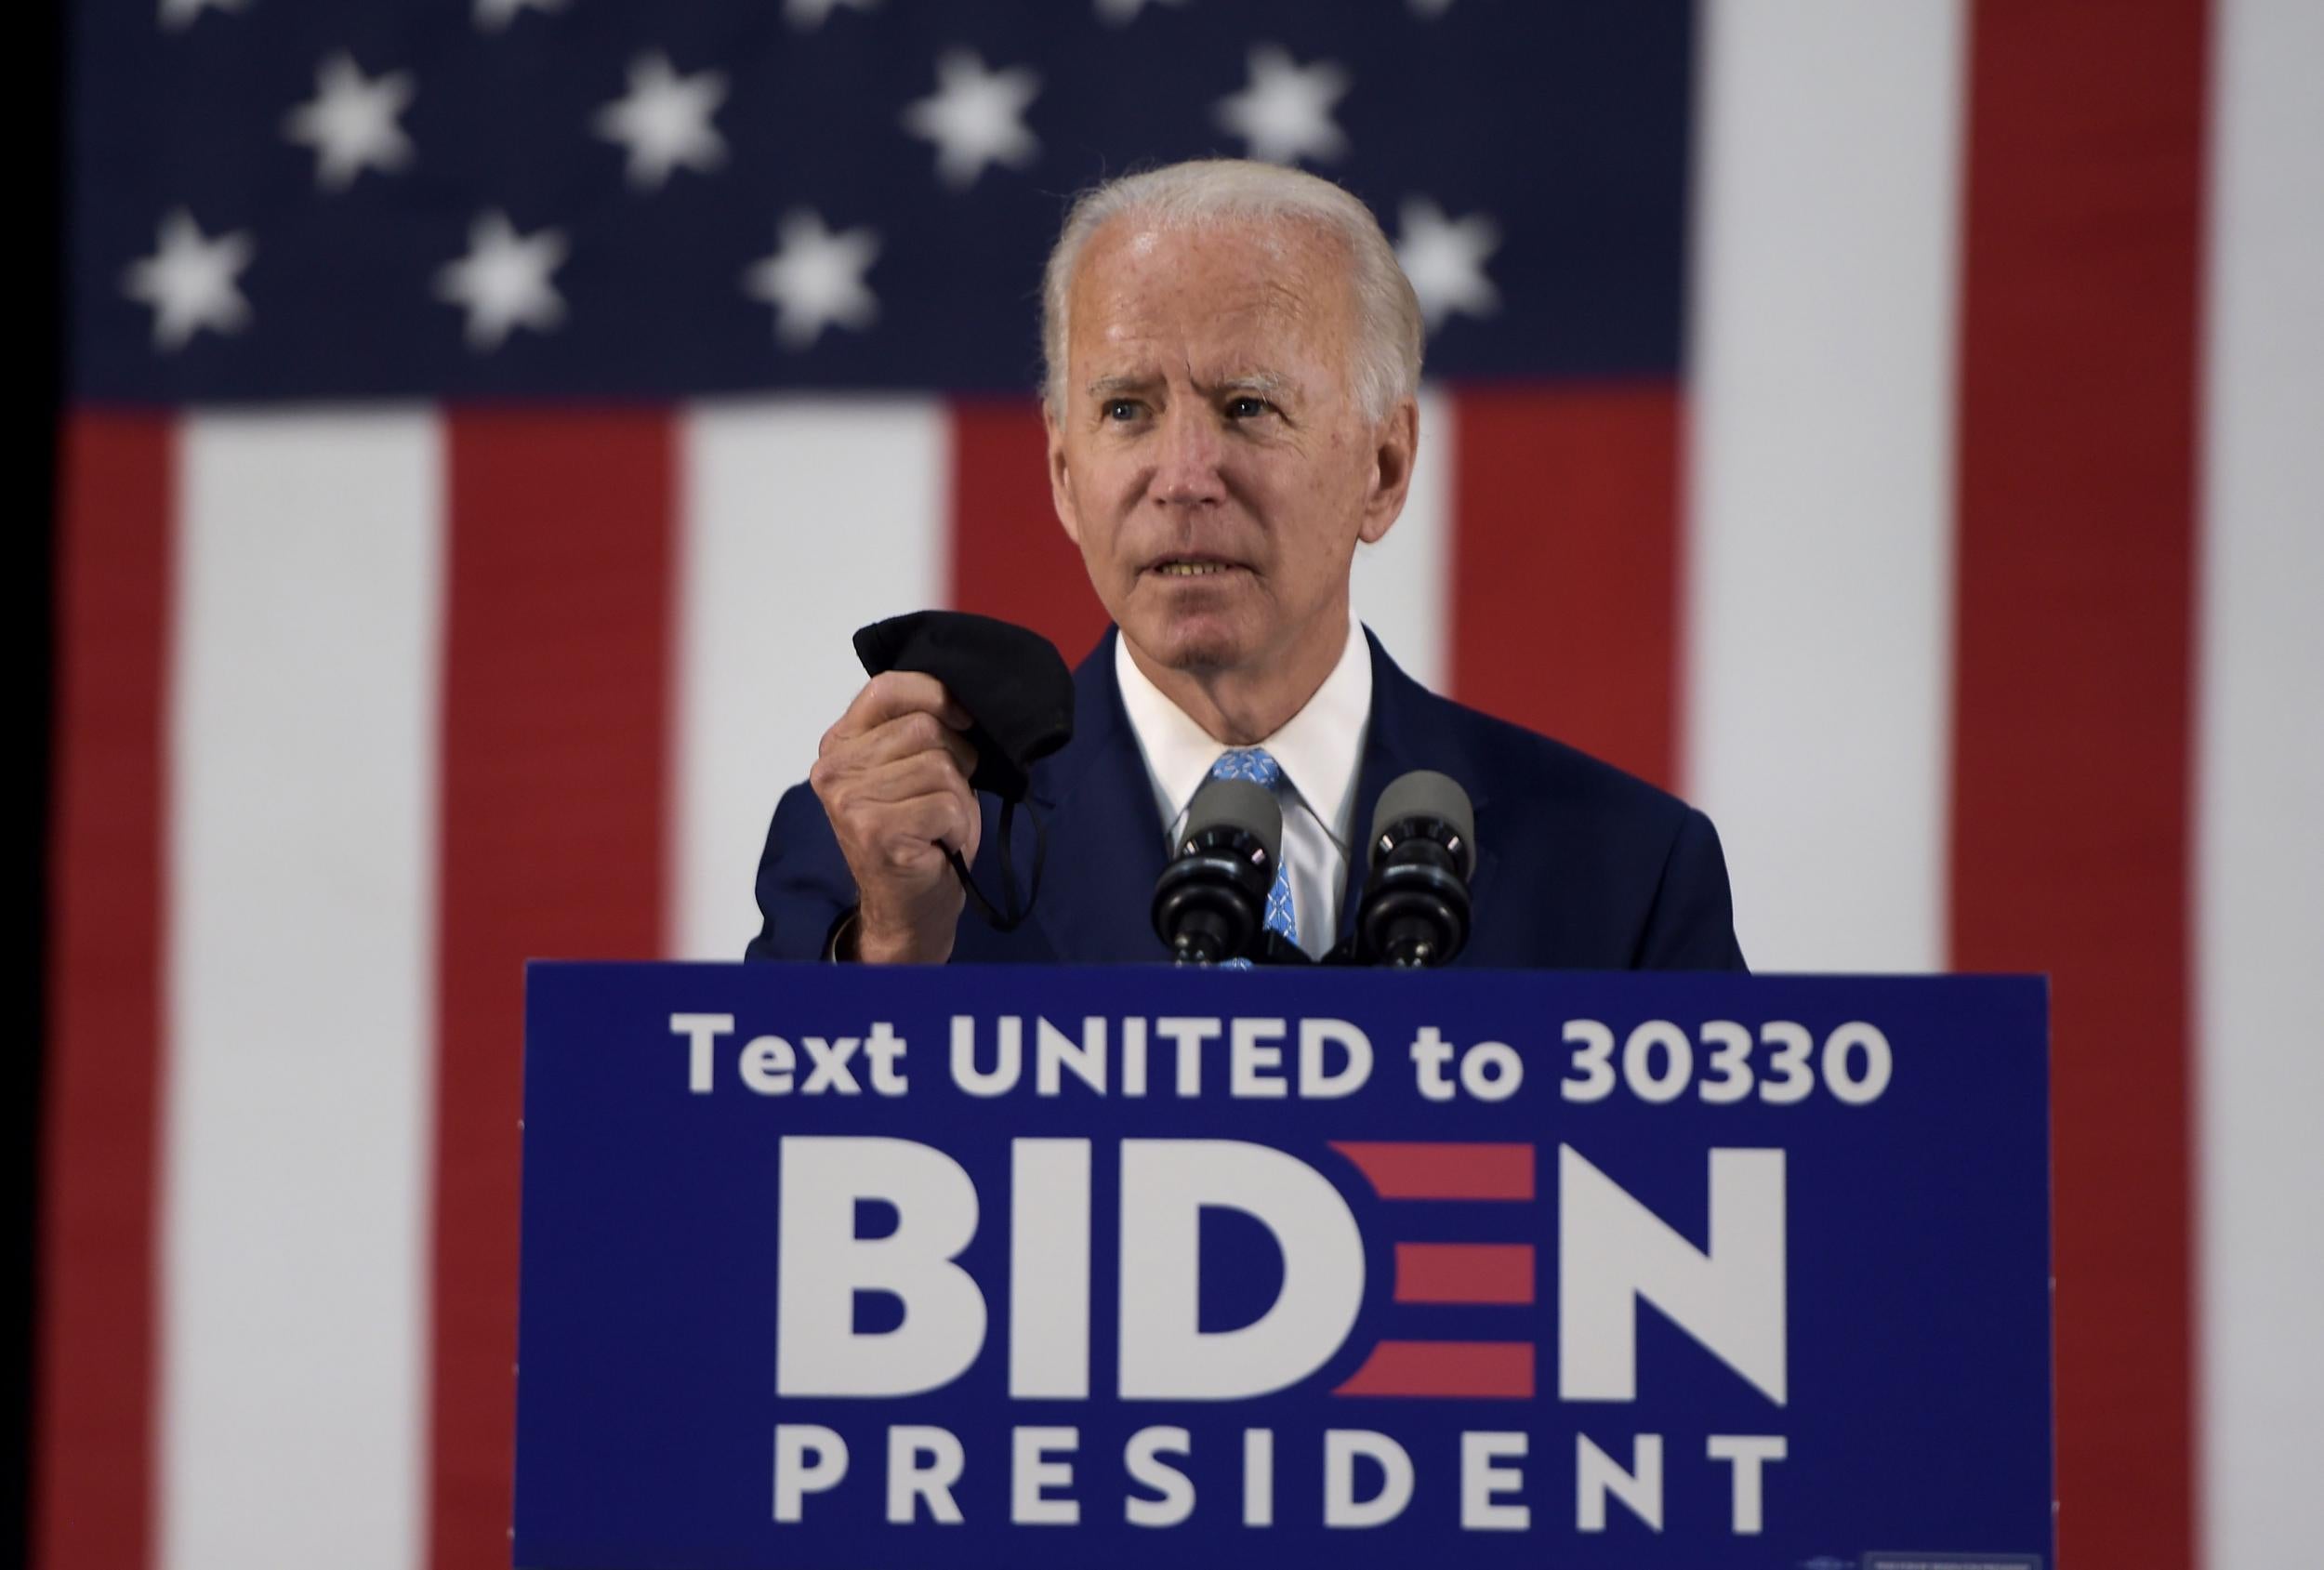 Joe Biden invokes his late son's military service as he suggests Trump 'unfit to be president' over Russia claims